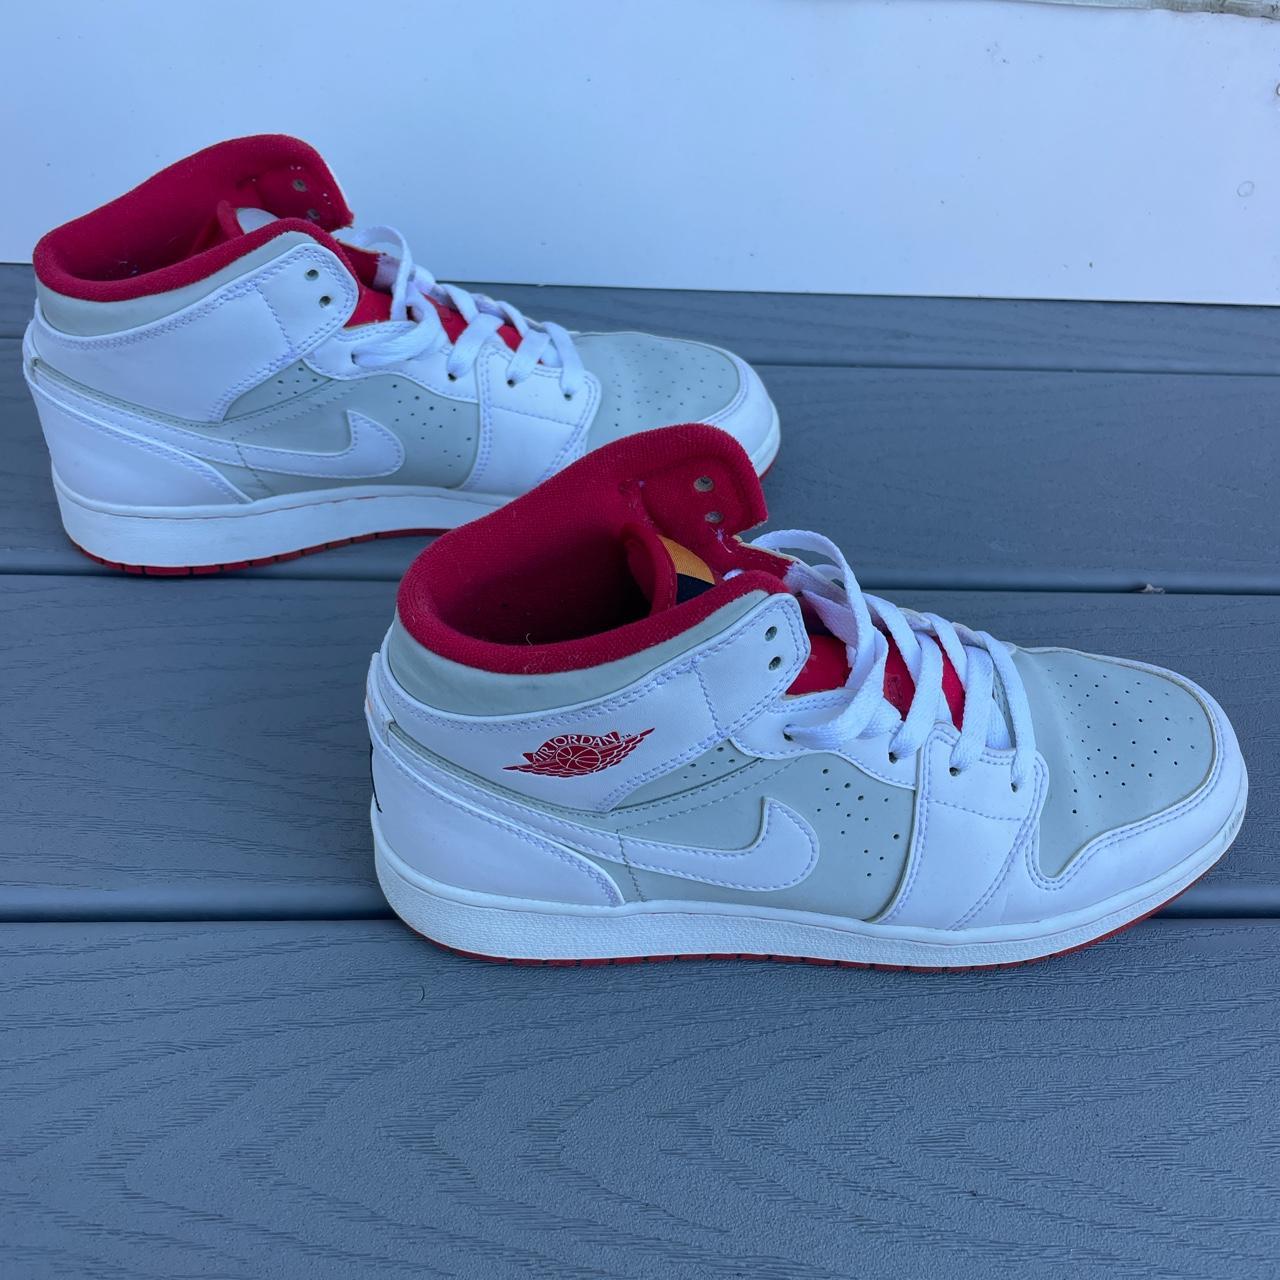 Nike Women's White and Red Trainers Depop